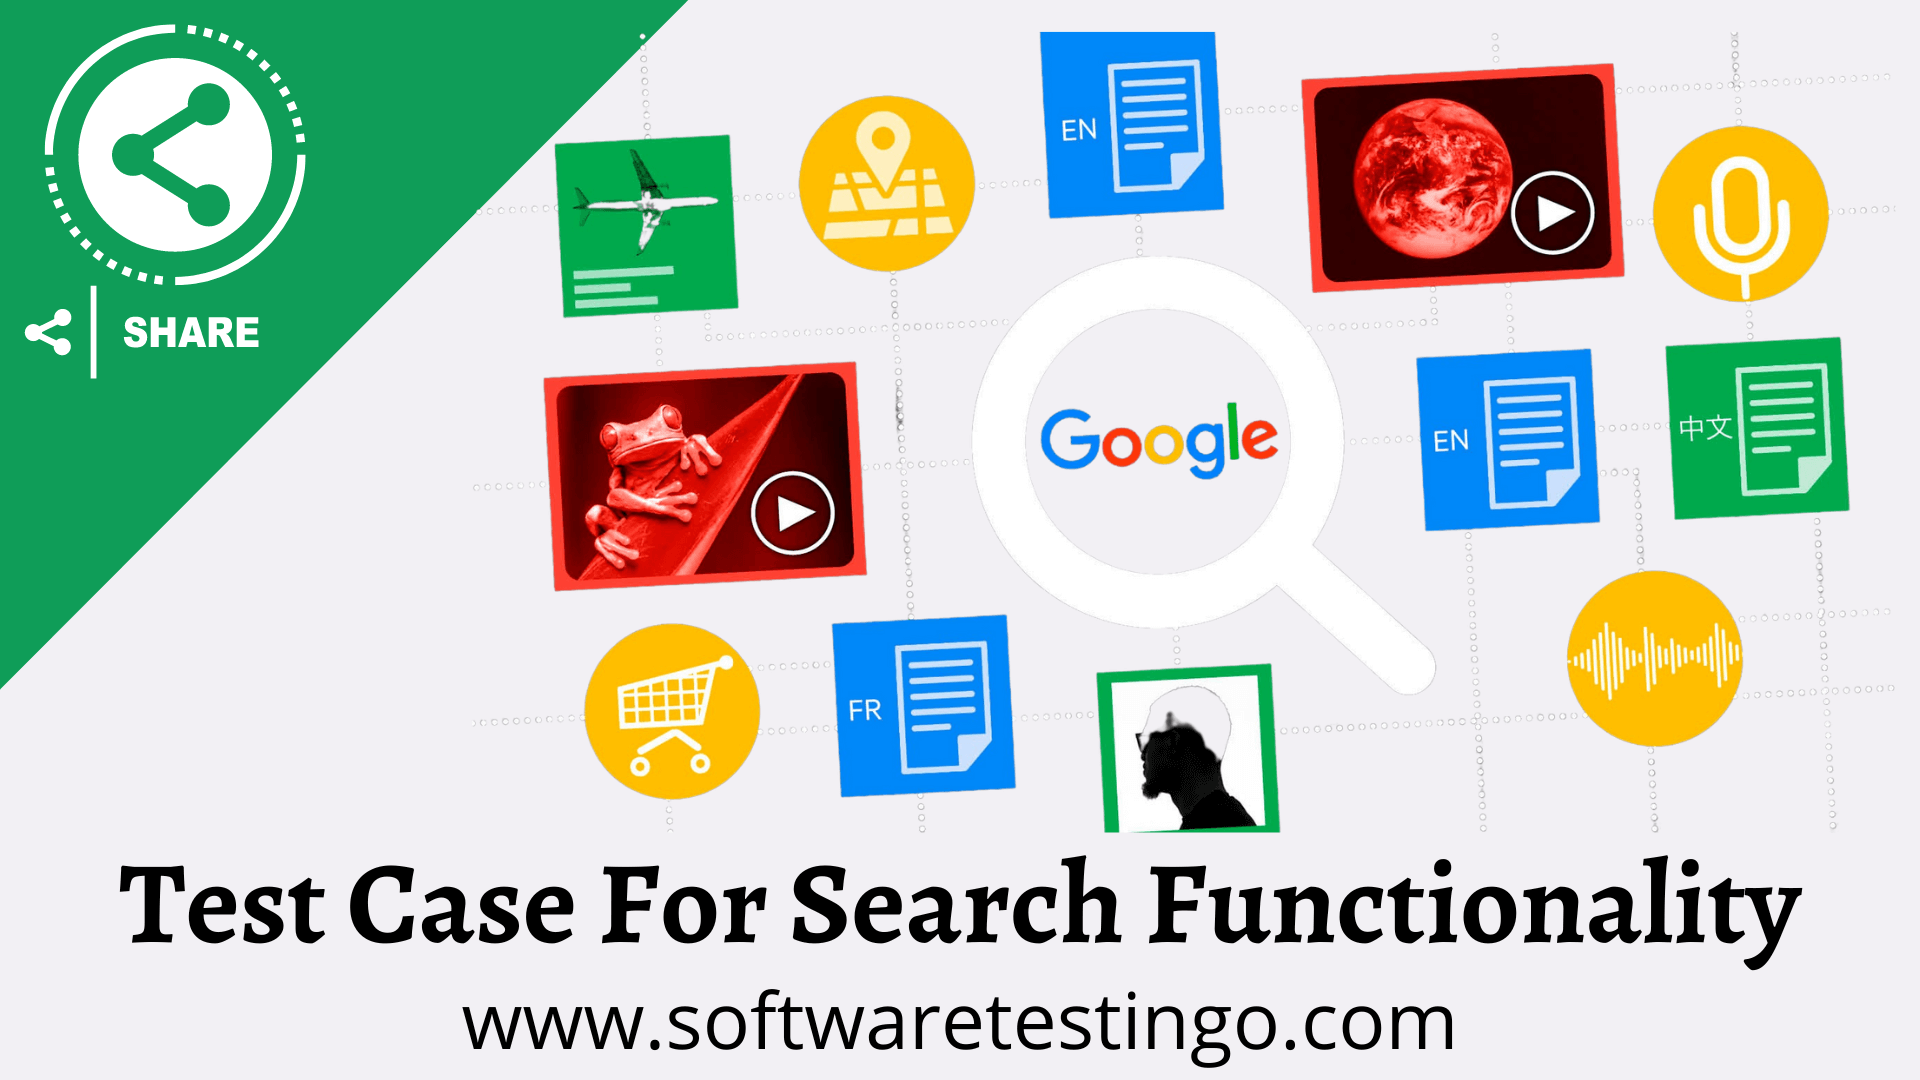 Test Case For Search Functionality